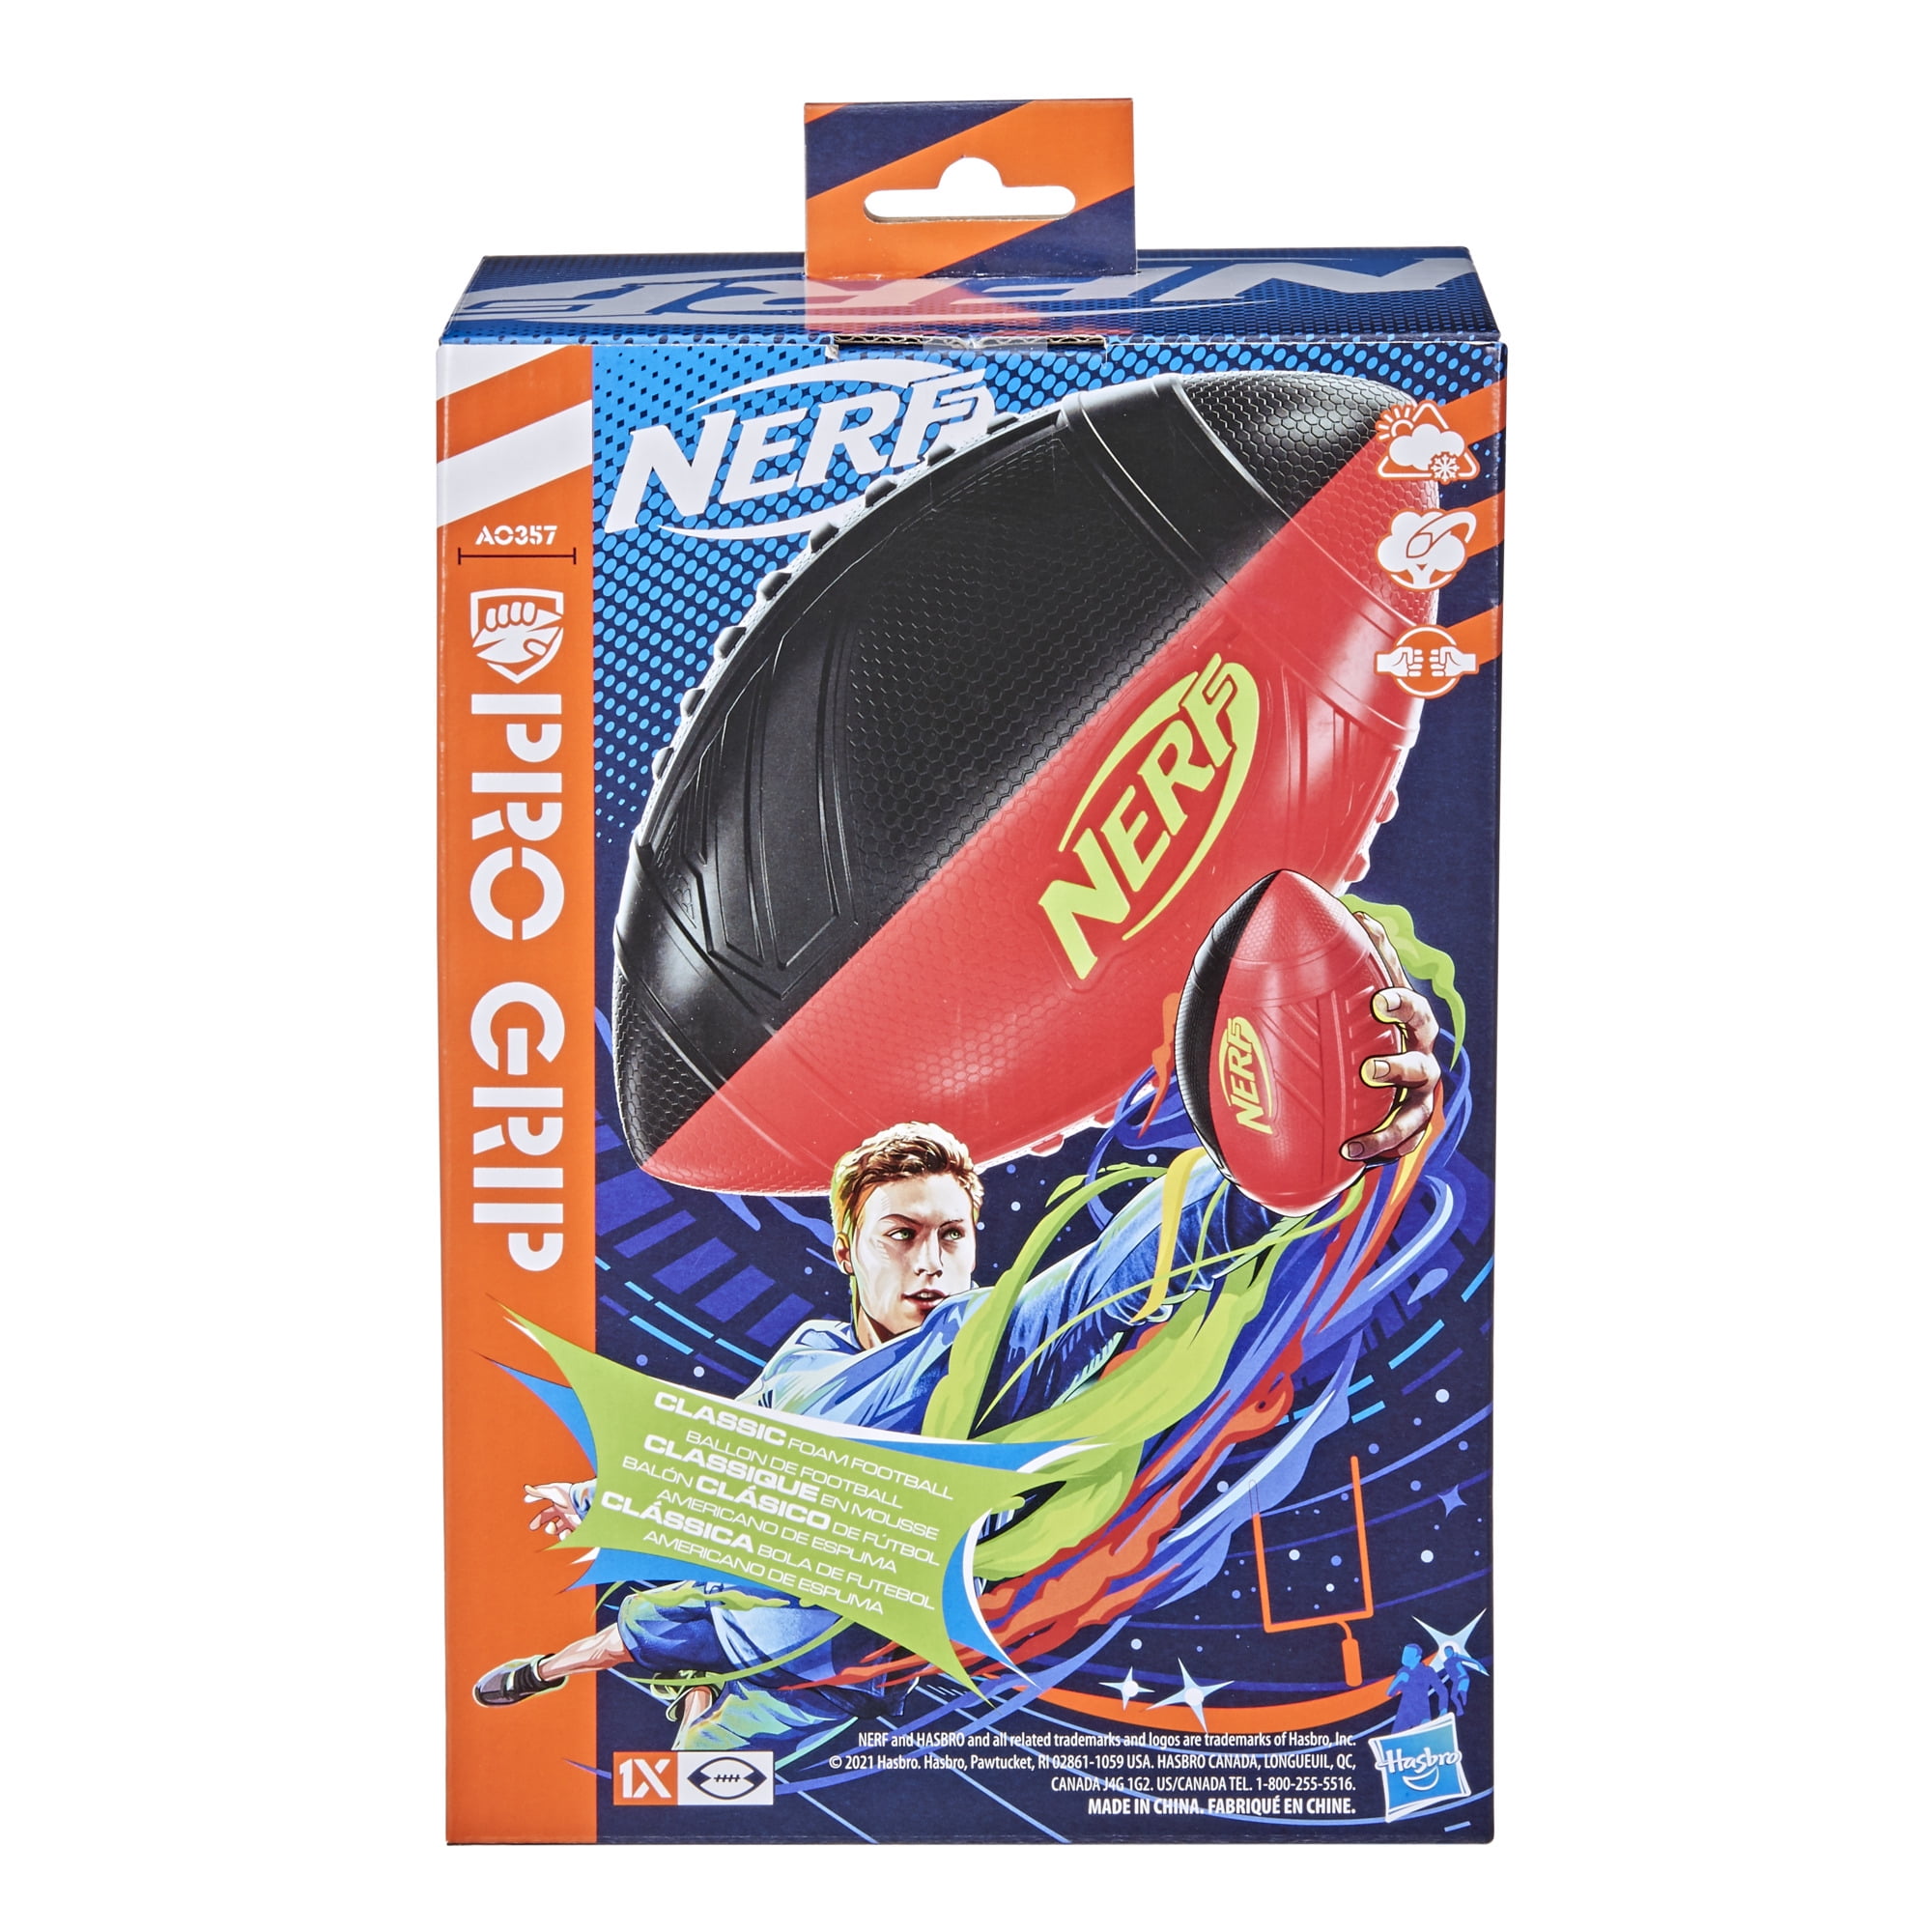 Details about   NERF Pro Grip Football Classic Foam Ball Easy to Catch and Throw Feb.1,21 New